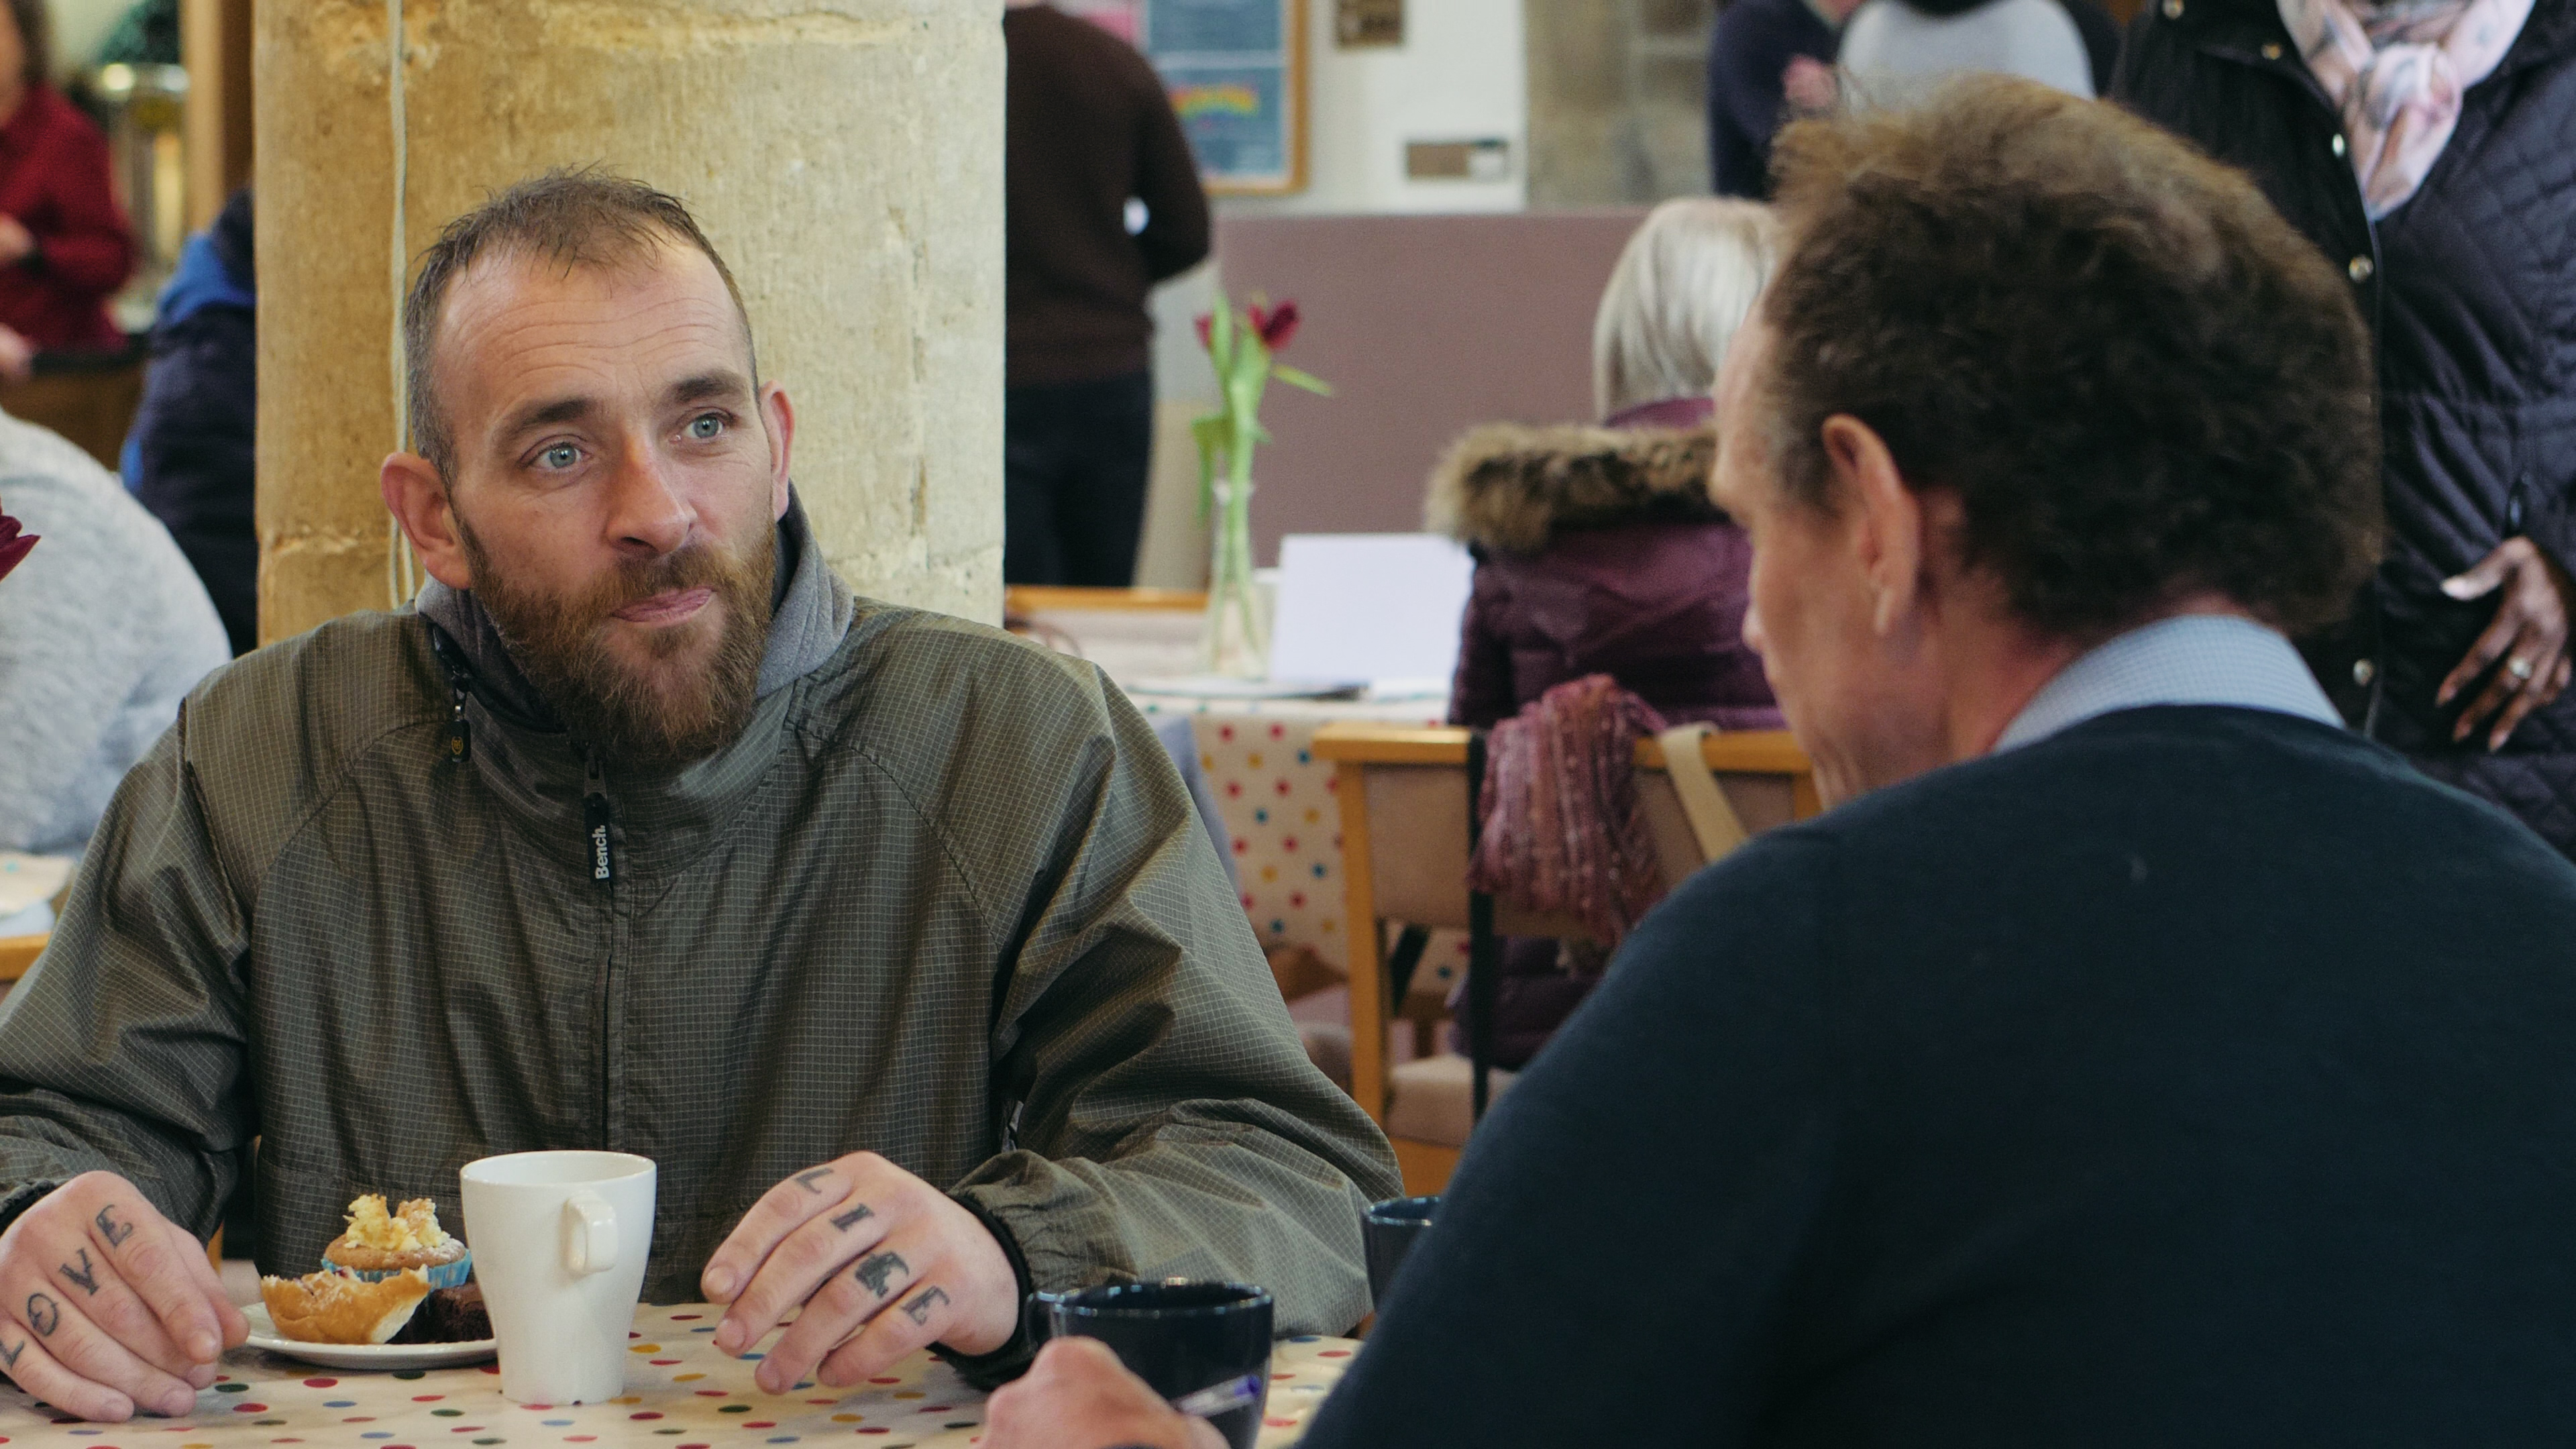 A man sits in a church drinking tea and eating cake while chatting to another man.